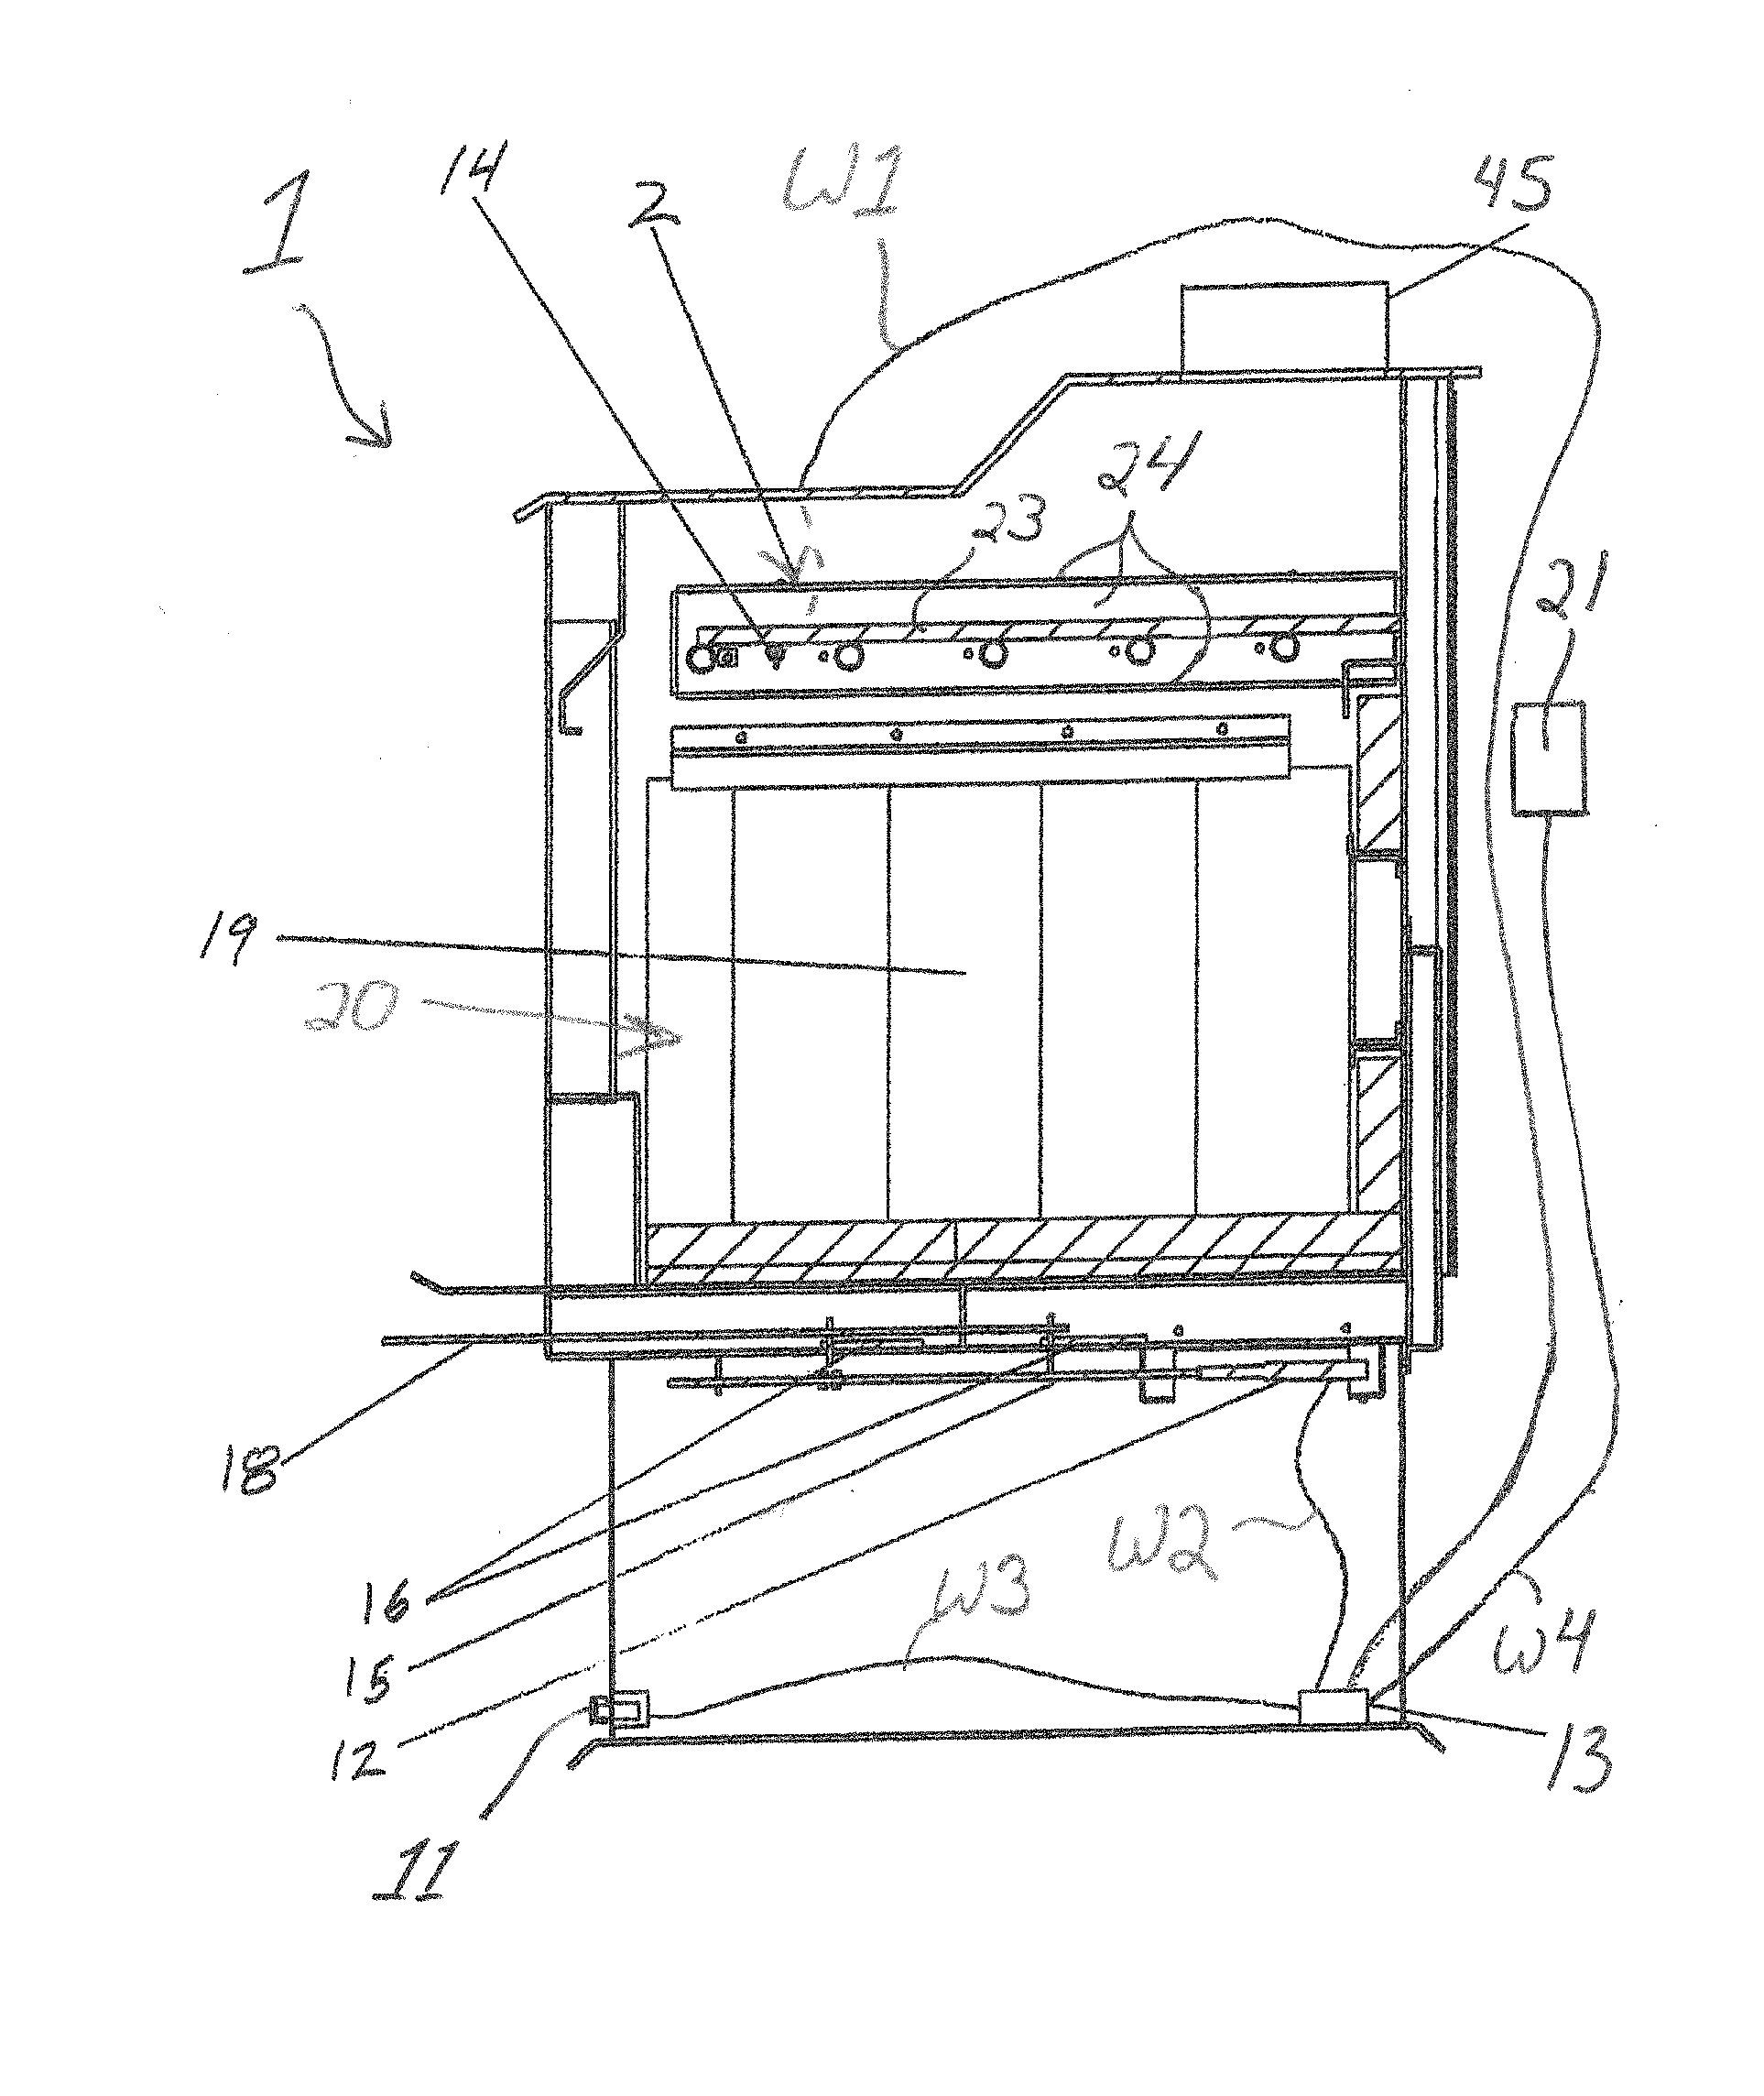 Control system for monitoring and adjusting combustion performance in a cordwood-fired heating appliance